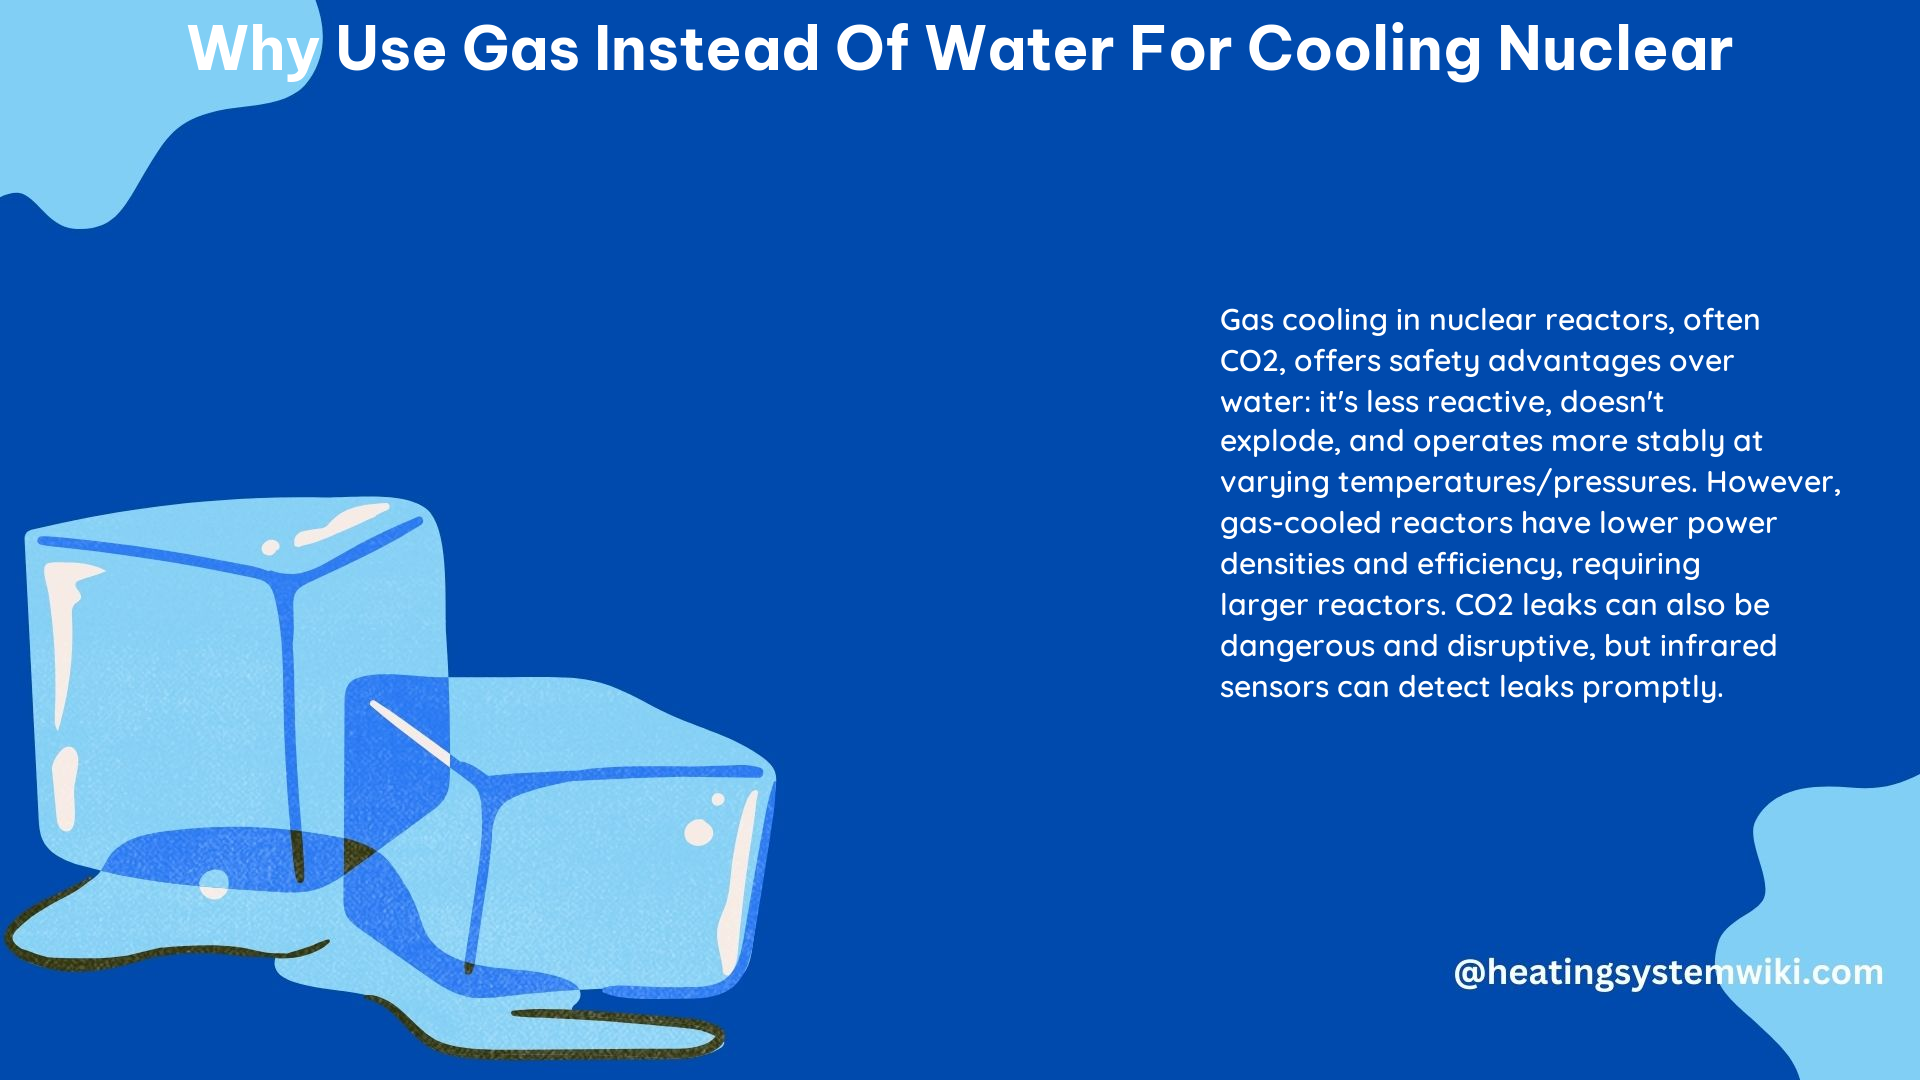 Why Use Gas Instead of Water for Cooling Nuclear